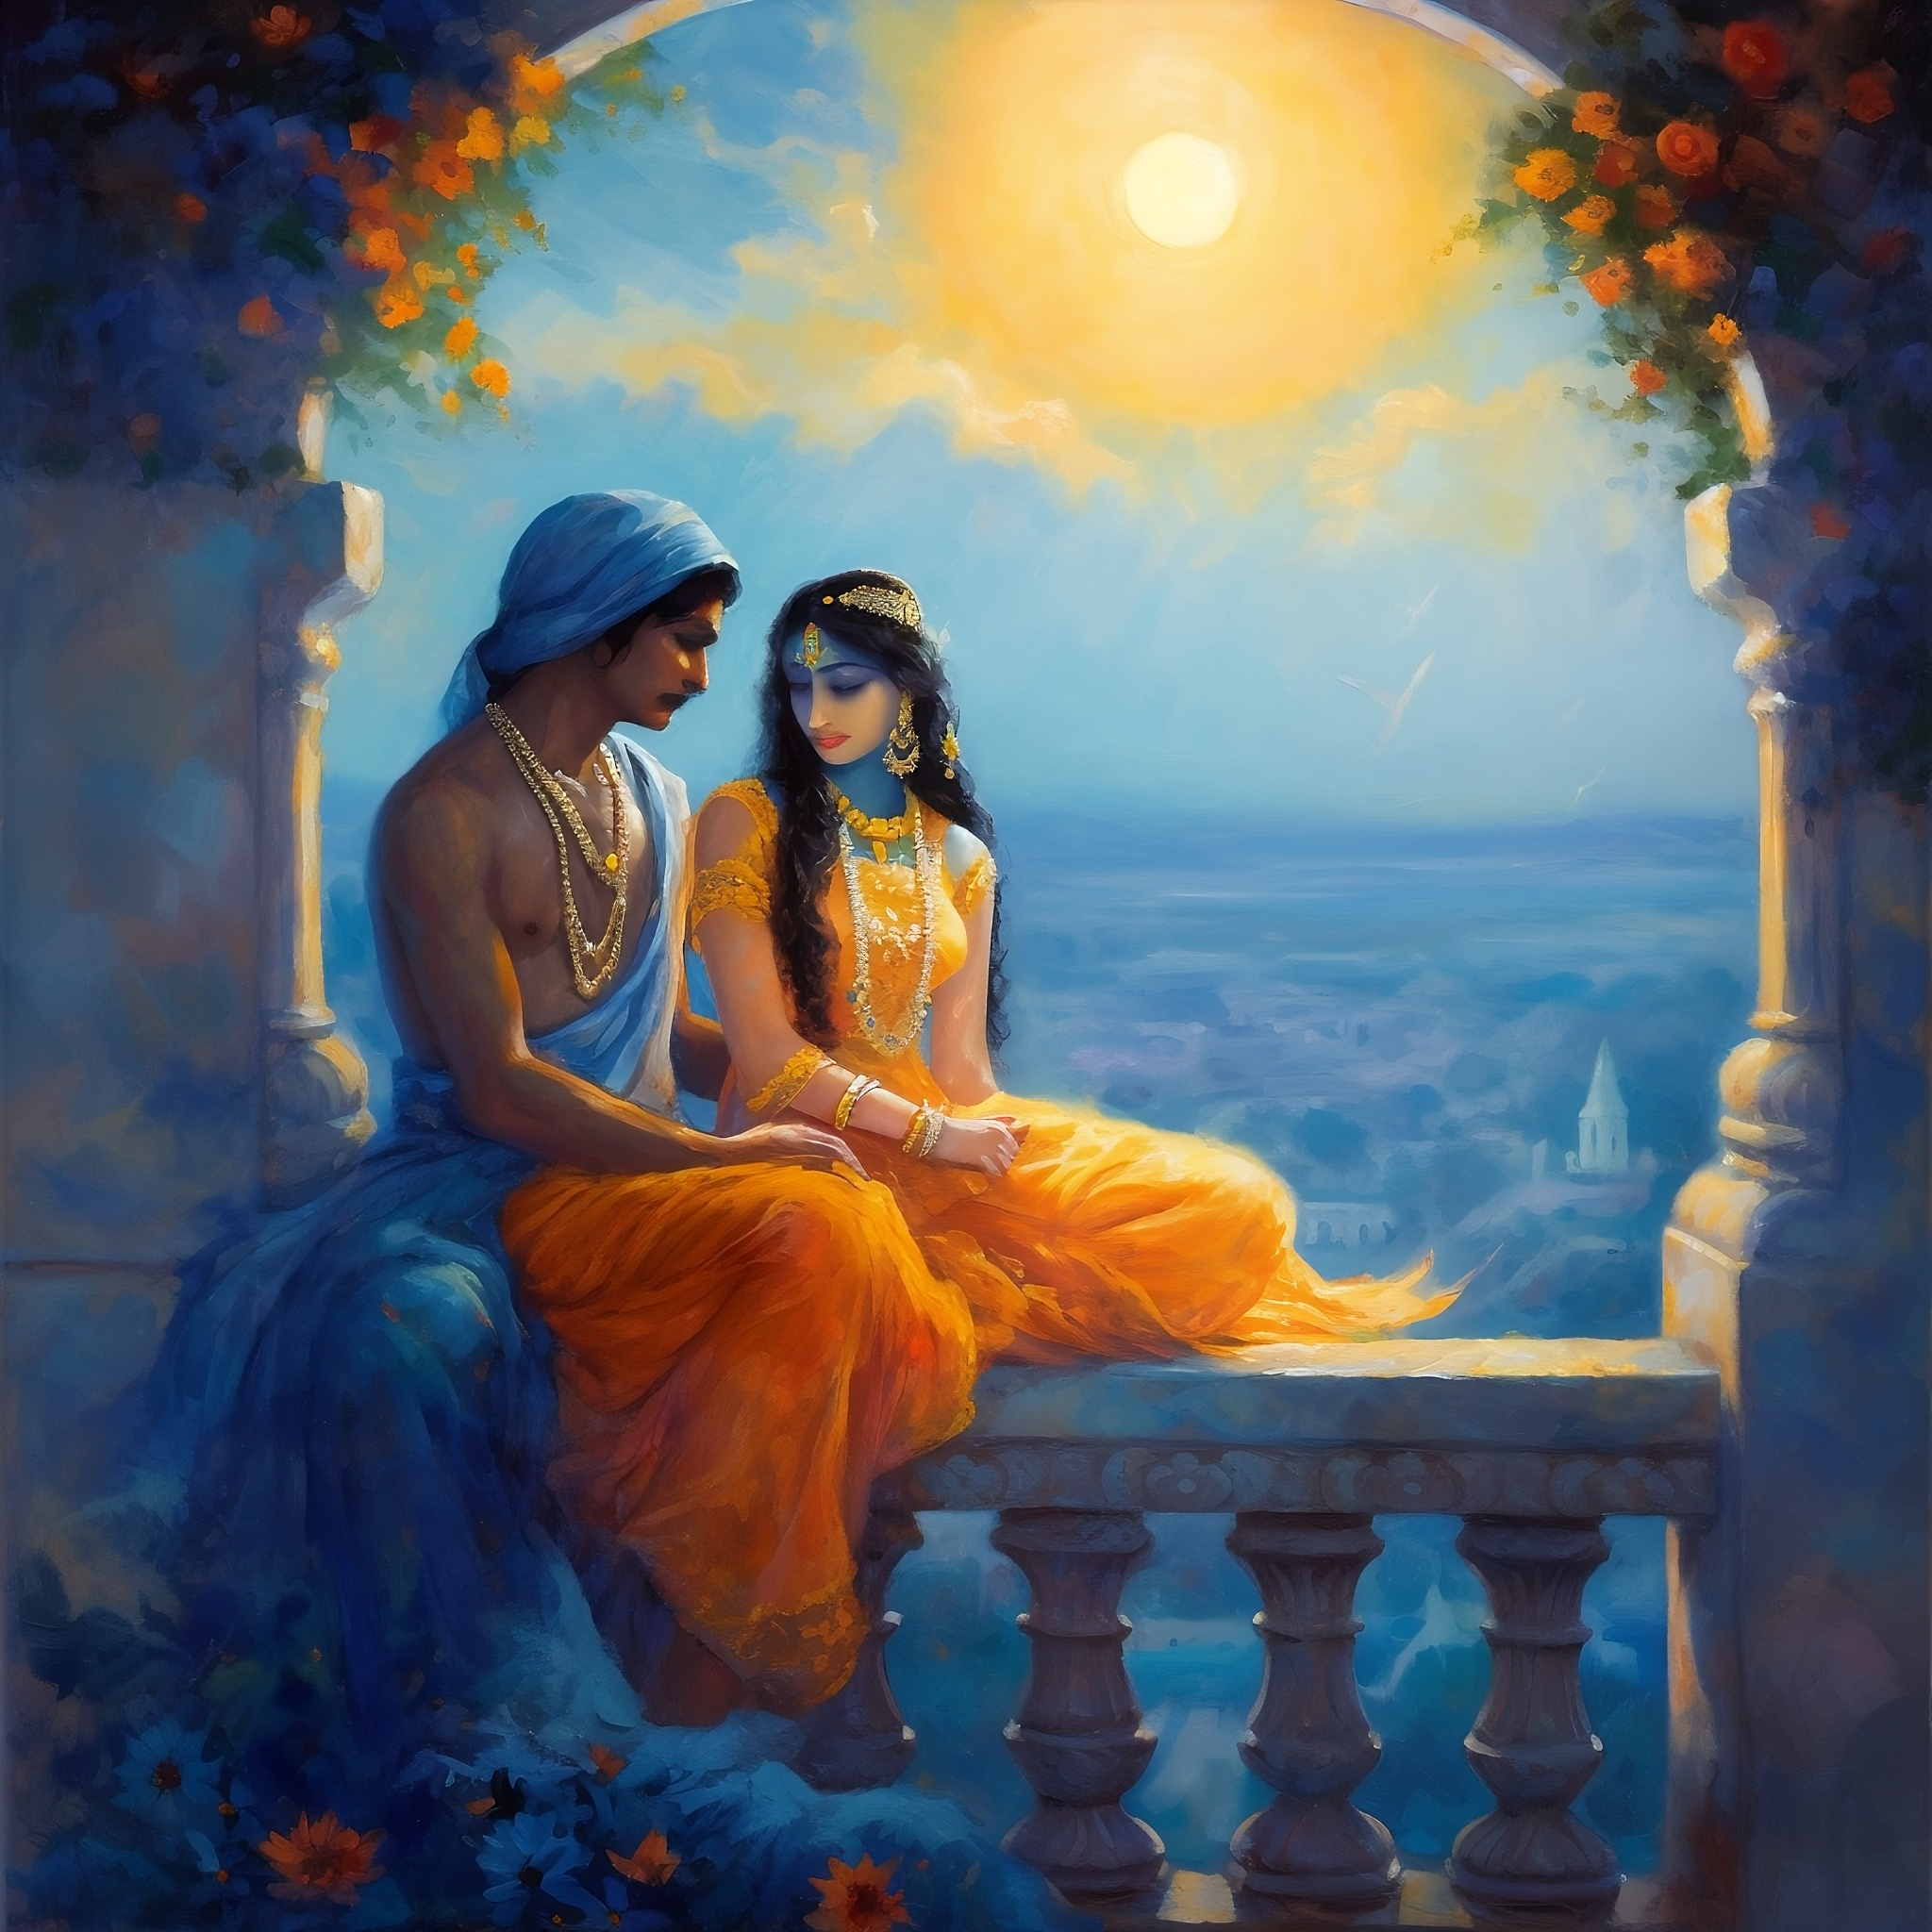 Serene Sunset Rendezvous: Radha Krishna in a Balcony with Floral Surroundings - Oil Painting Print